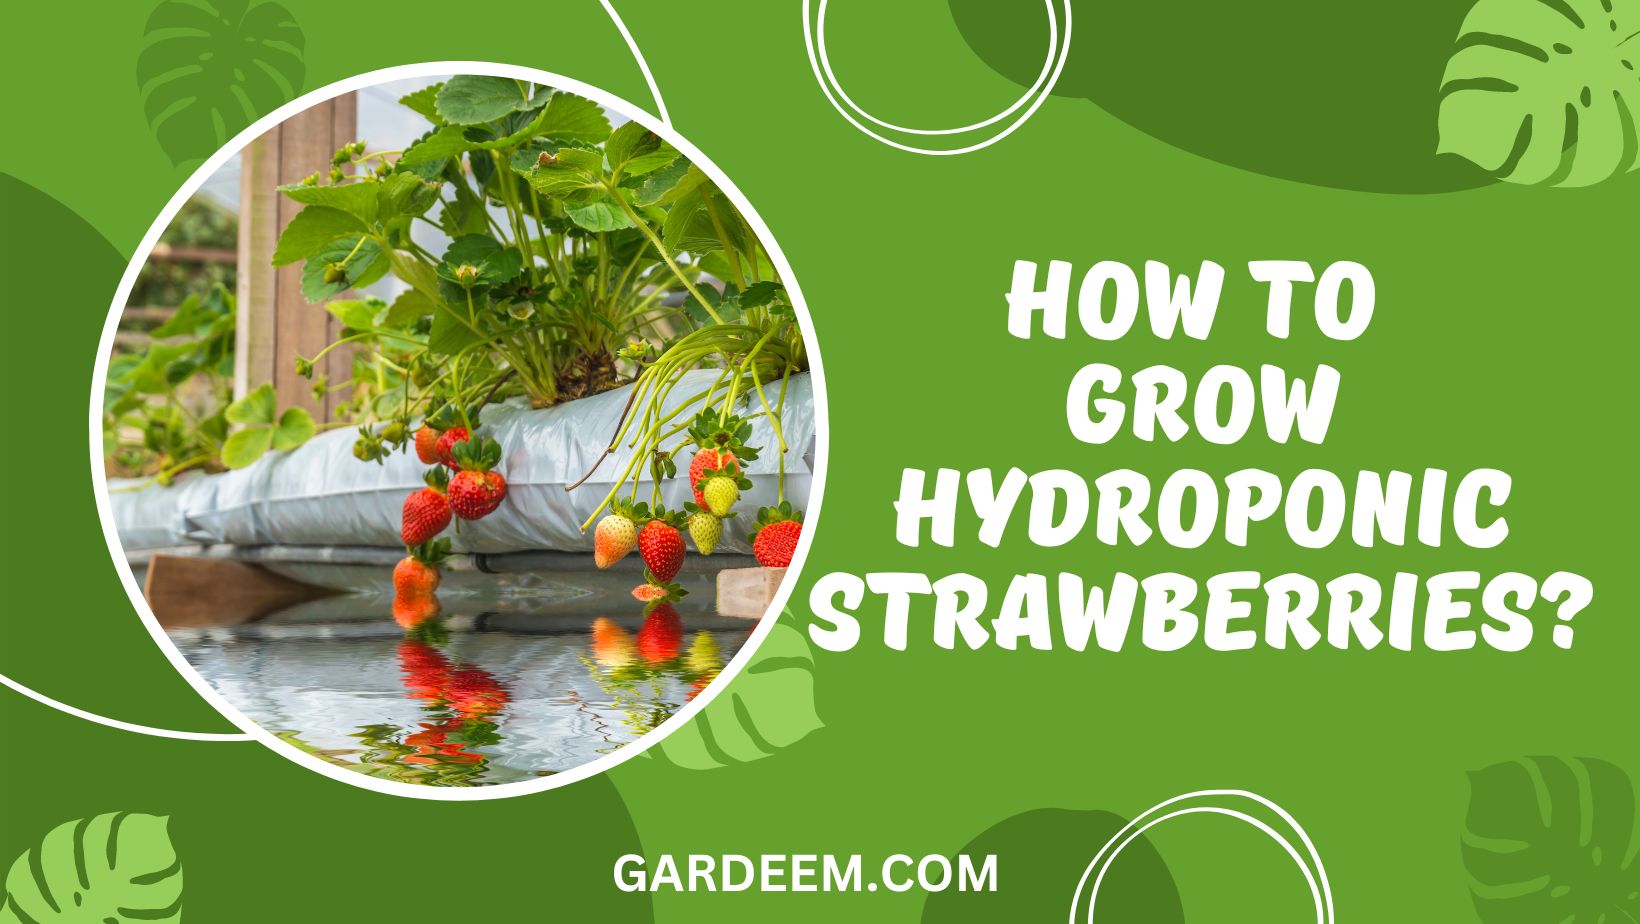 How To Grow Hydroponic Strawberries?